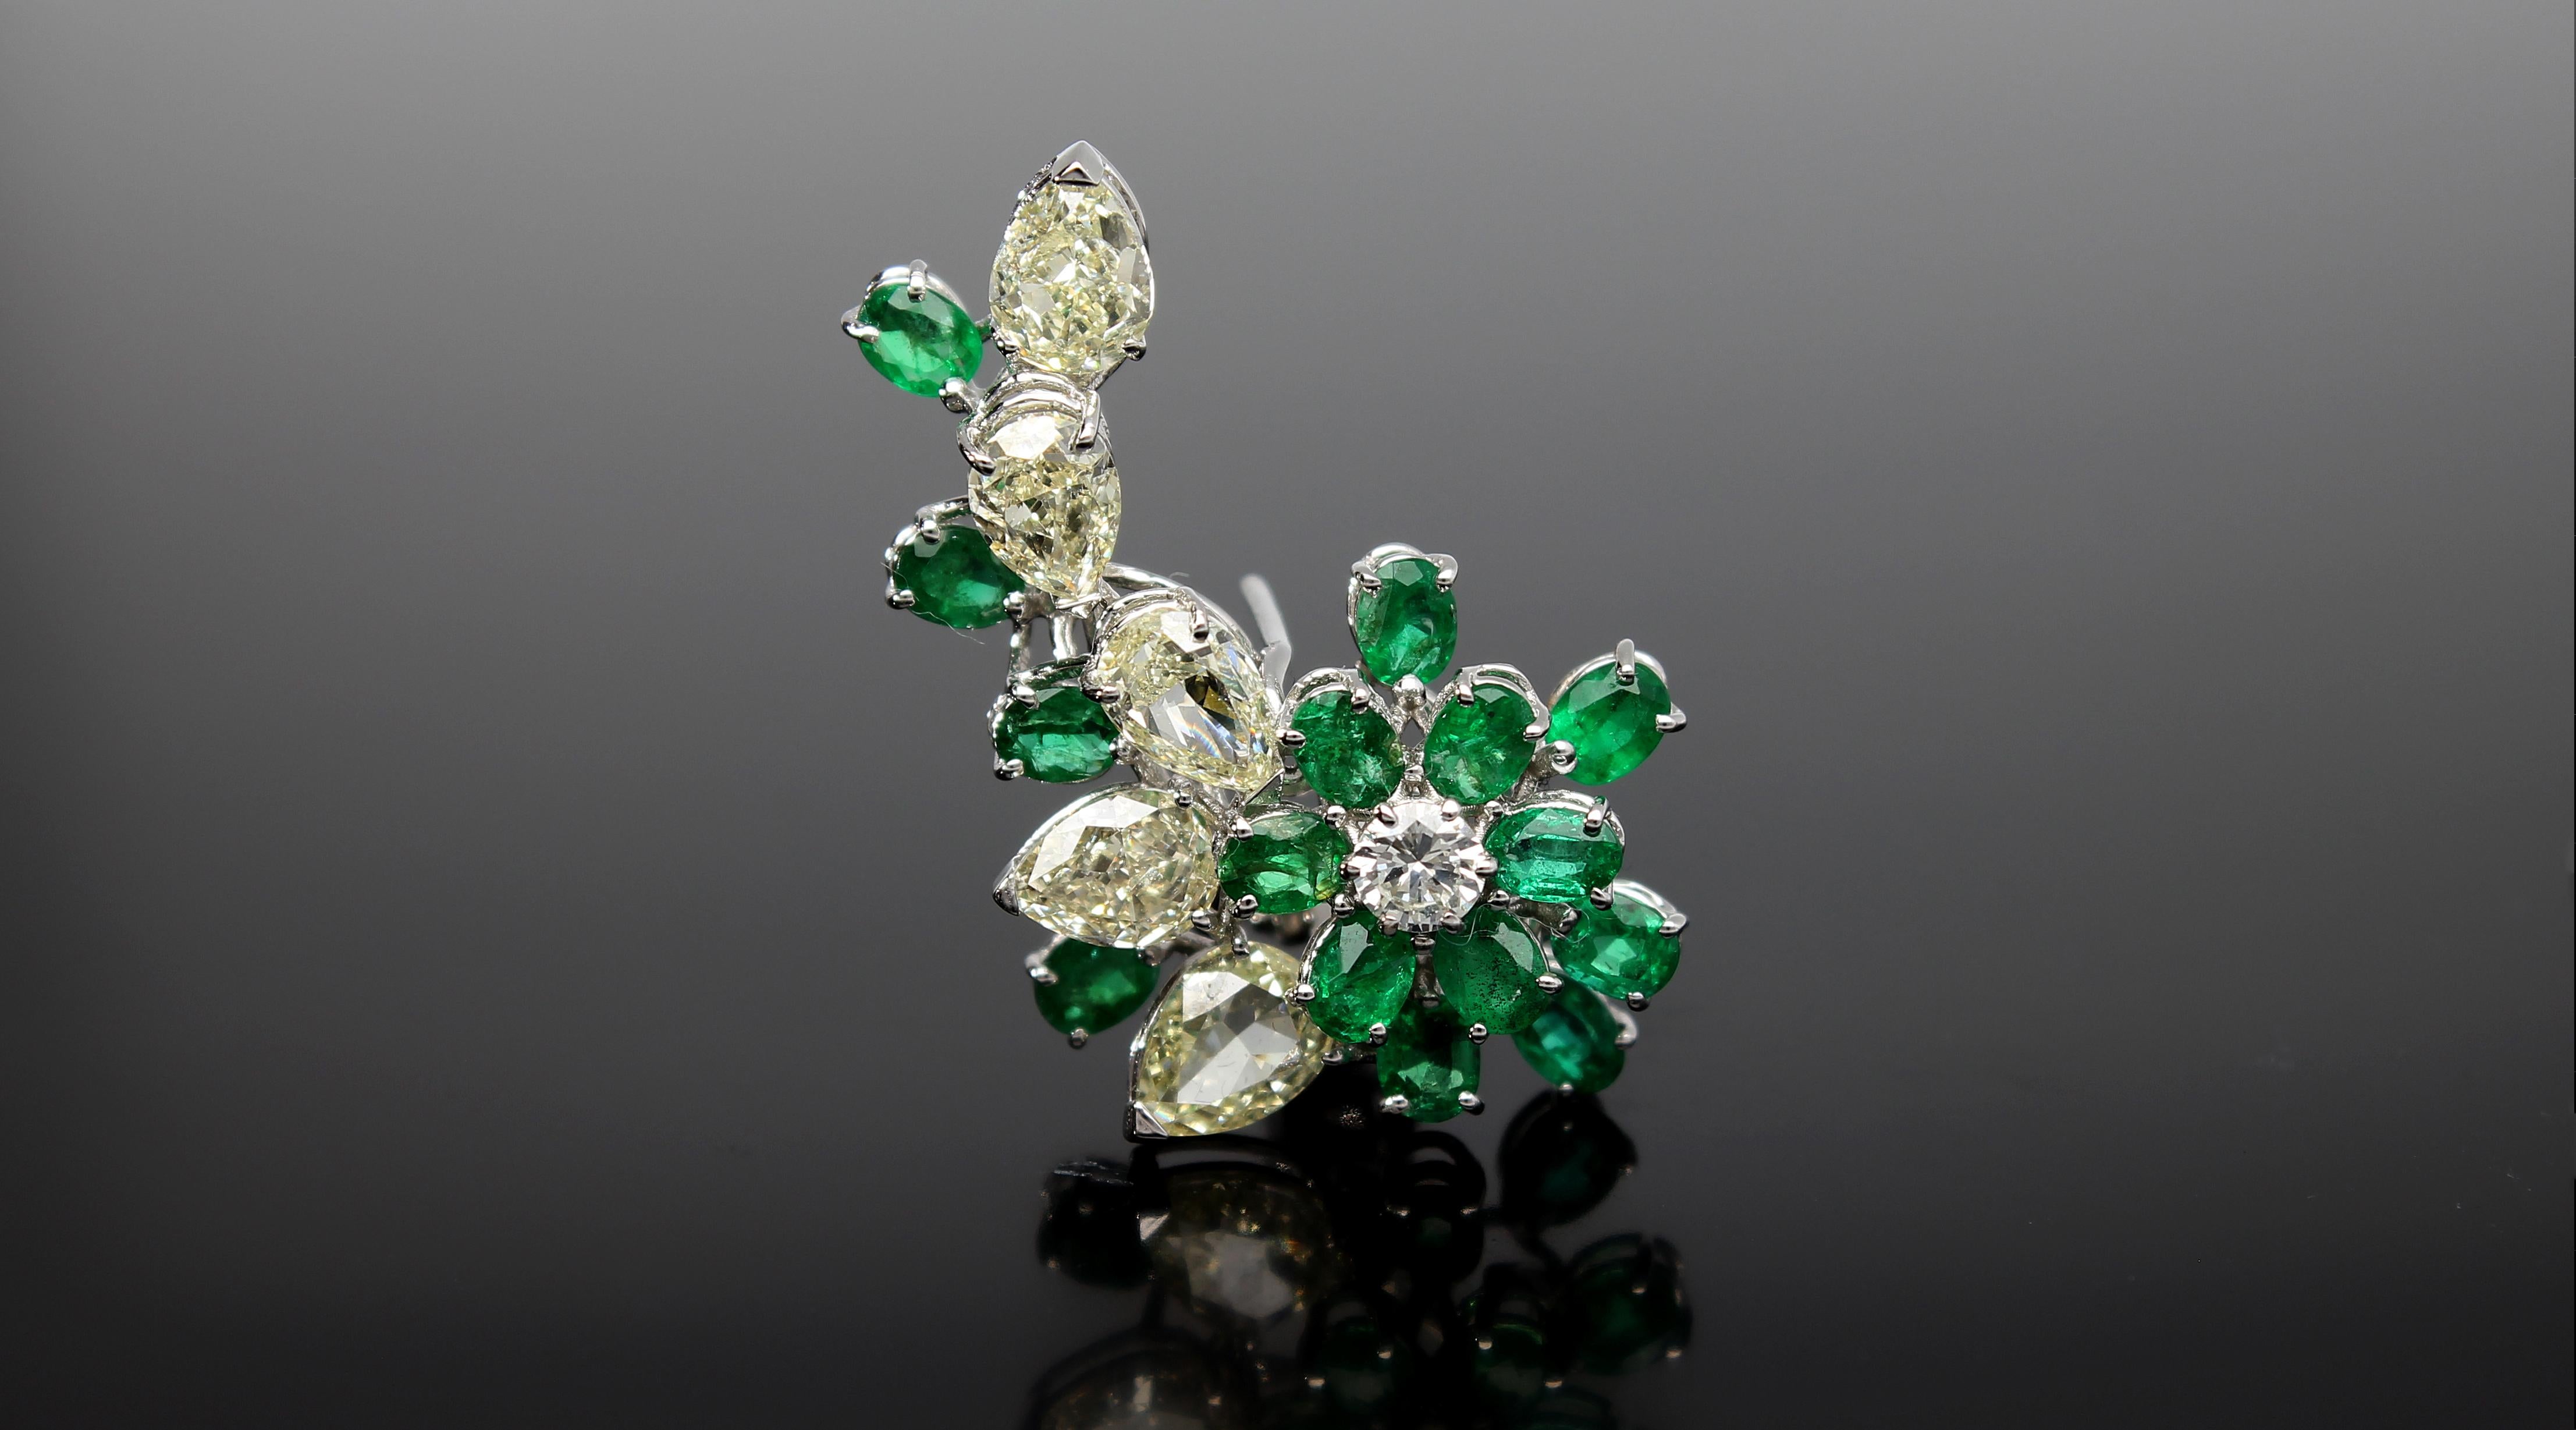 Retro Cluster Earring of Diamonds and Pear-Cut Emeralds 18 Kt White Gold Made in Italy